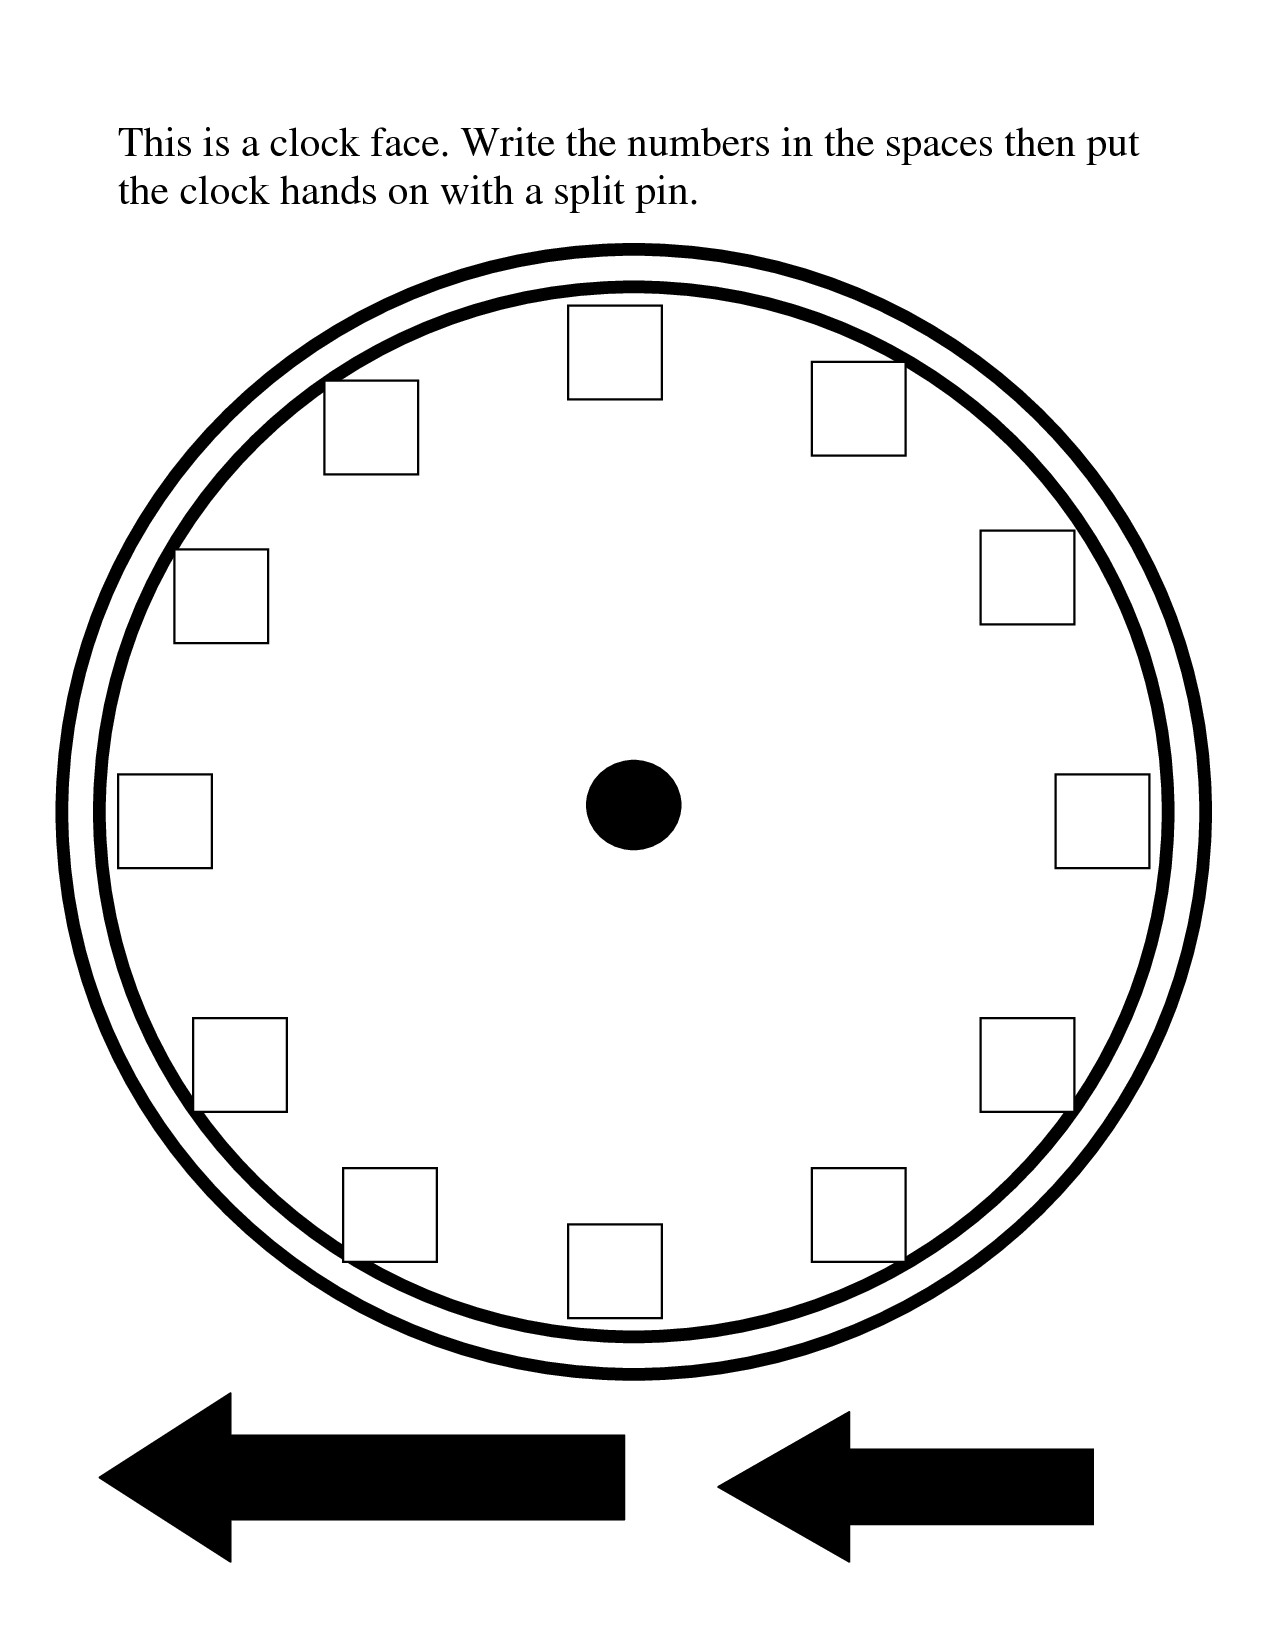 Analog Clock Without Hands Worksheets 74767 | DFILES